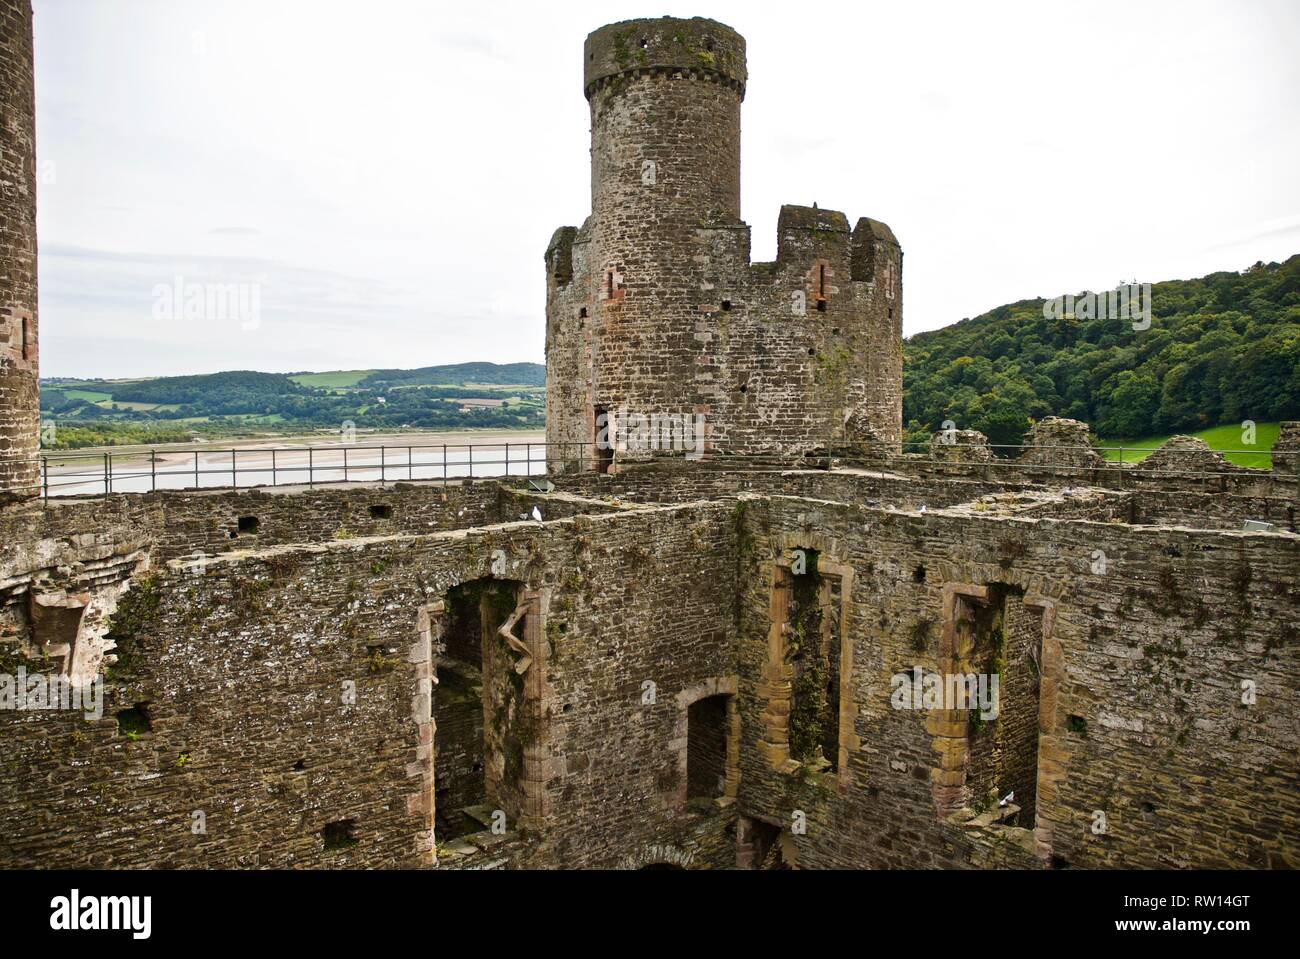 Crenellated tower, Conwy Castle, Conwy, North Wales, UK Stock Photo